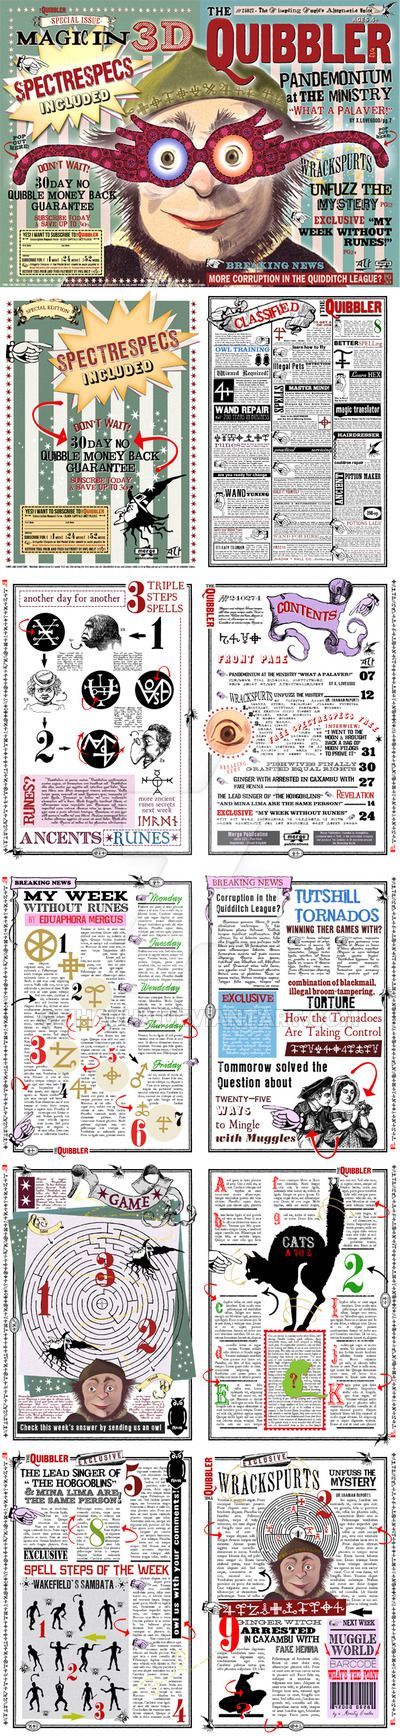 Quibbler Spectrespecs Replica Version with pages. by jhadha.deviantart.com on @DeviantArt